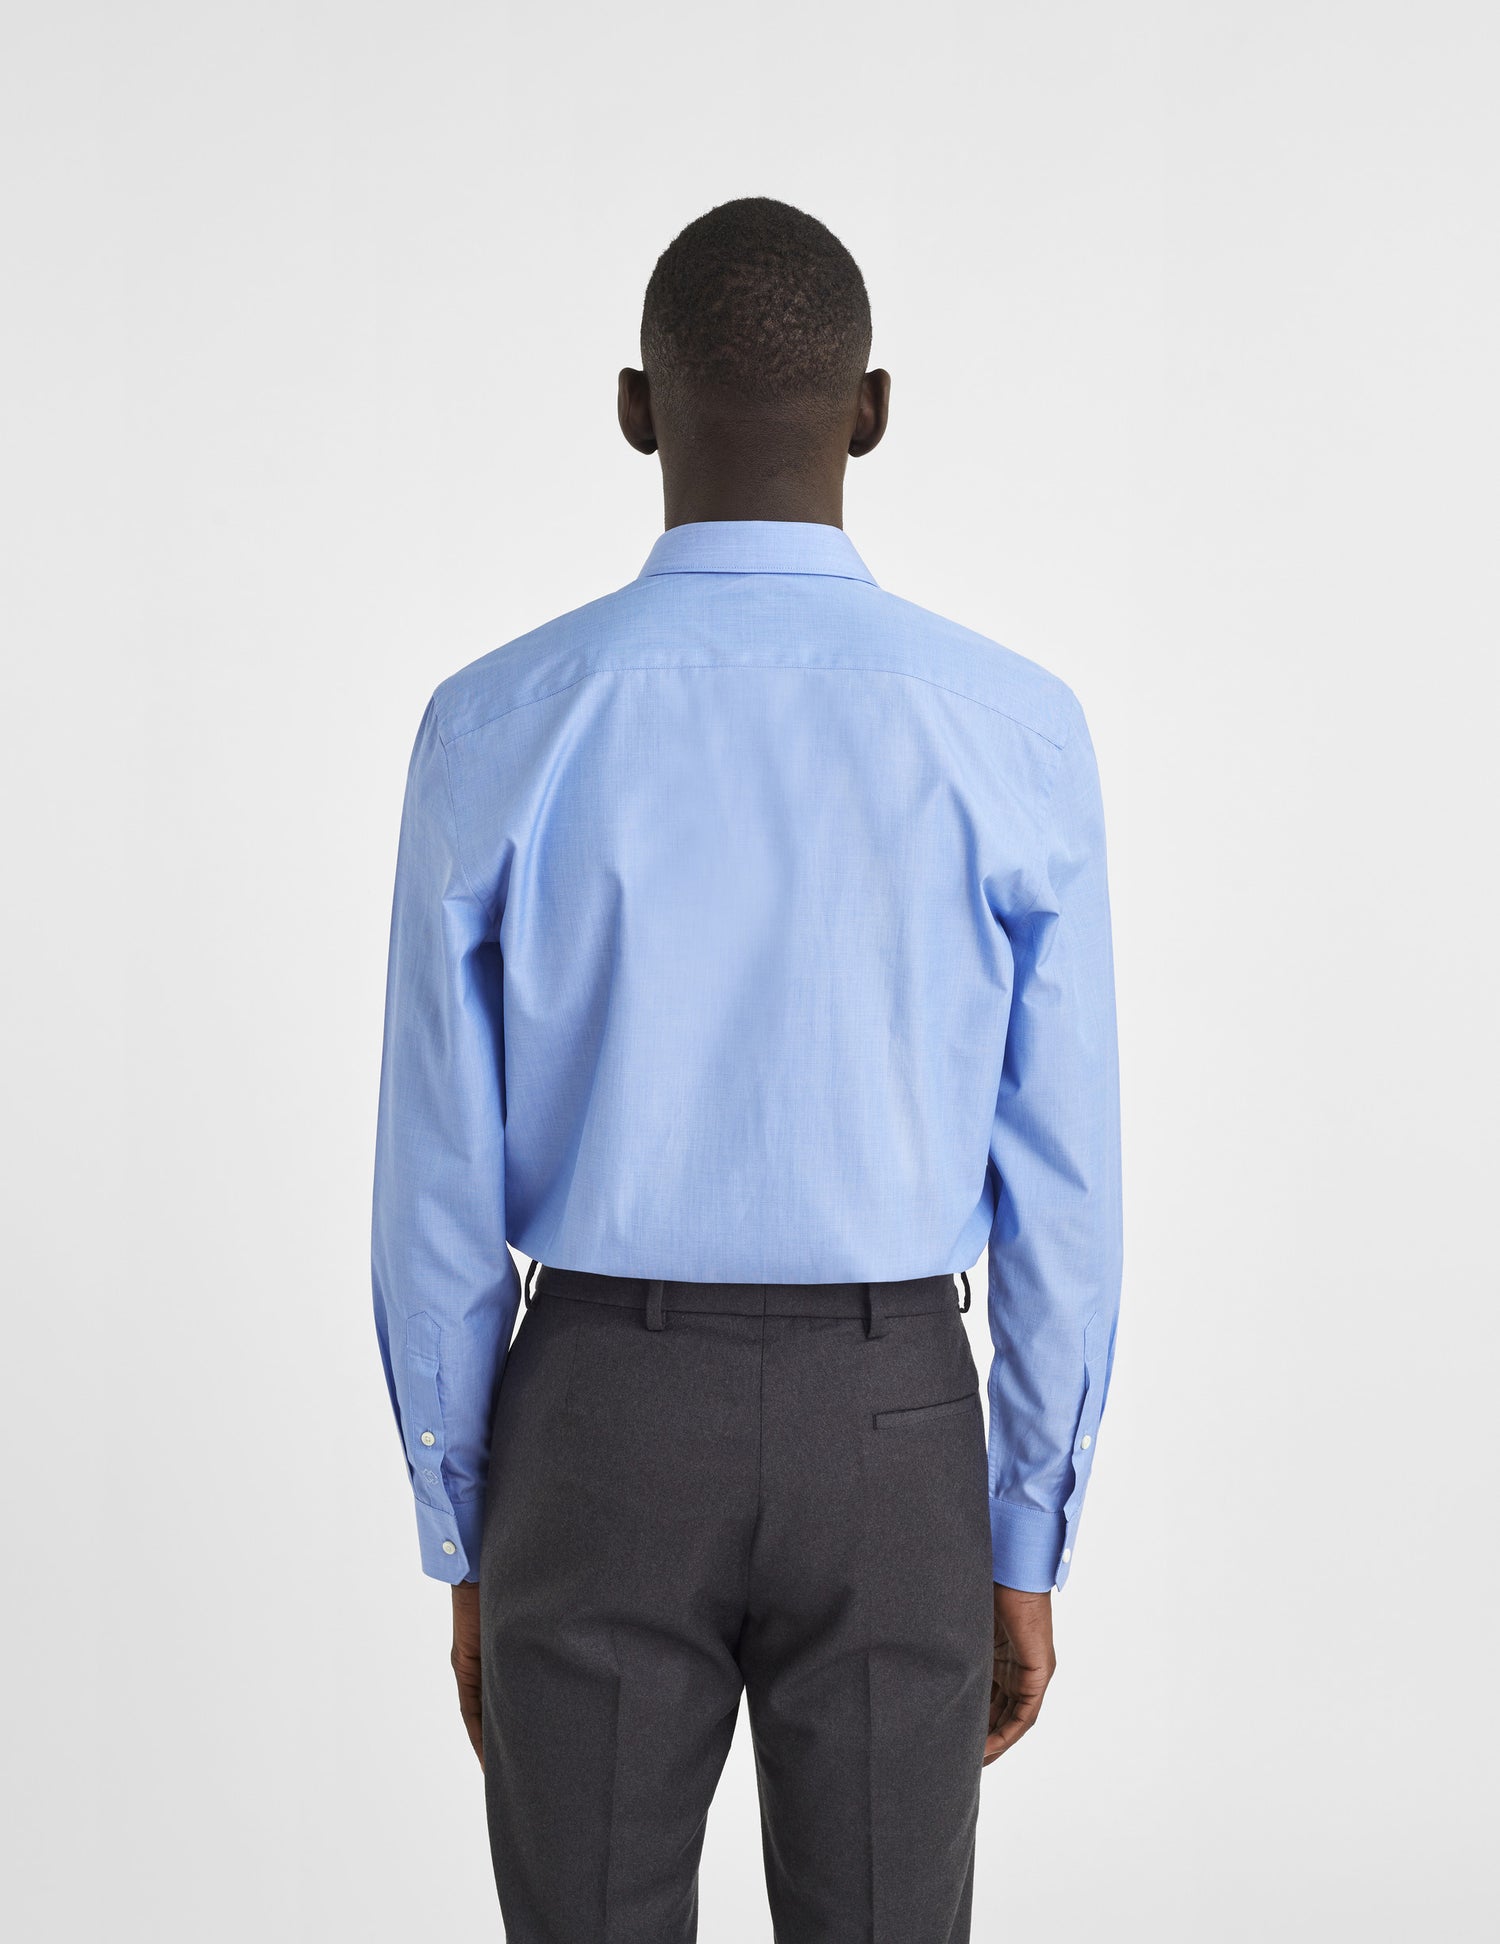 Semi-fitted blue shirt - Wire to wire - Figaret Collar#4